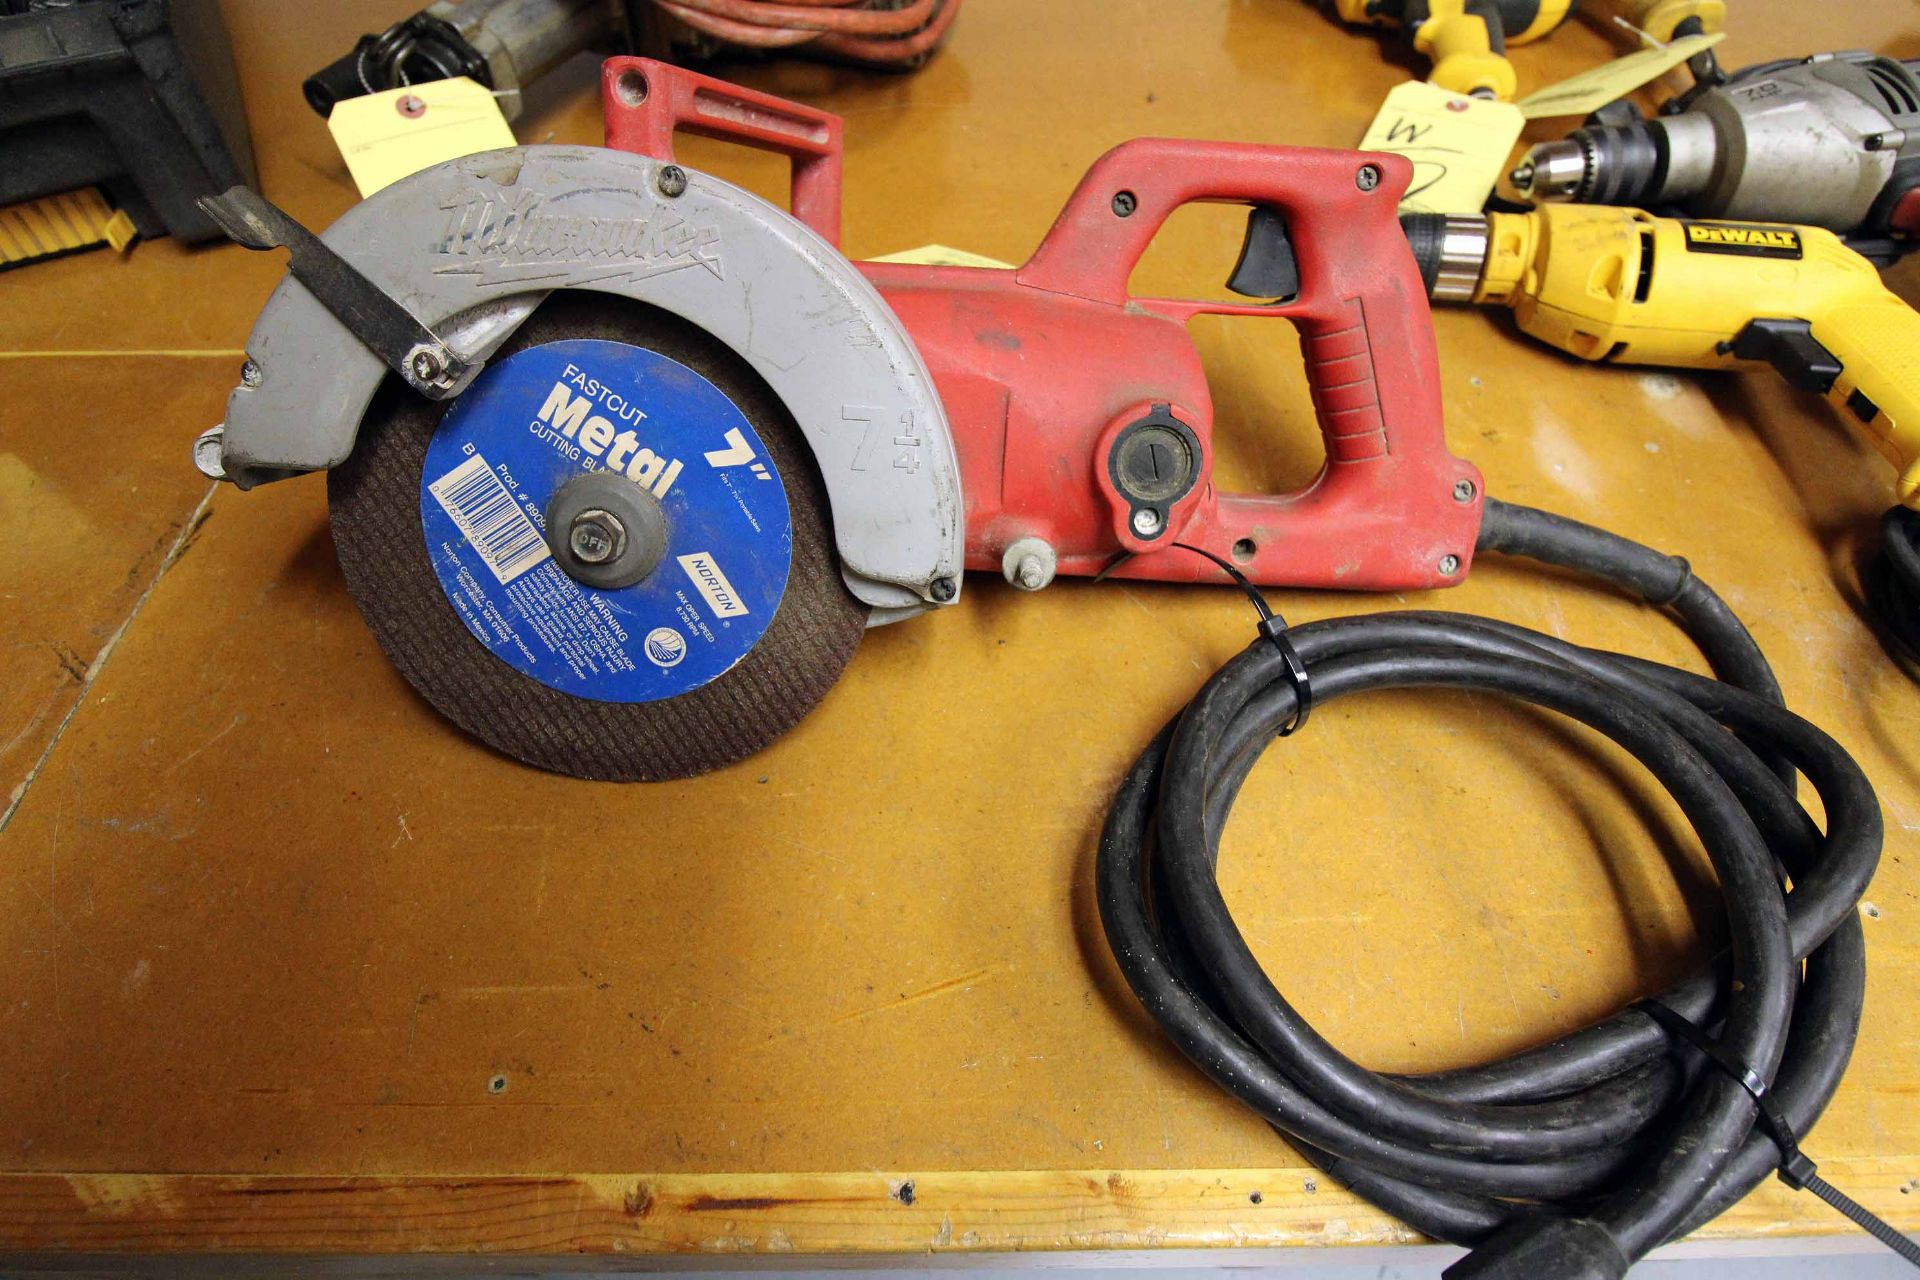 HEAVY DUTY WORM GEAR SAW, MILWAUKEE MDL. 6377, 7-1/4" dia., 4,400 RPM, 120 v. (Located at: